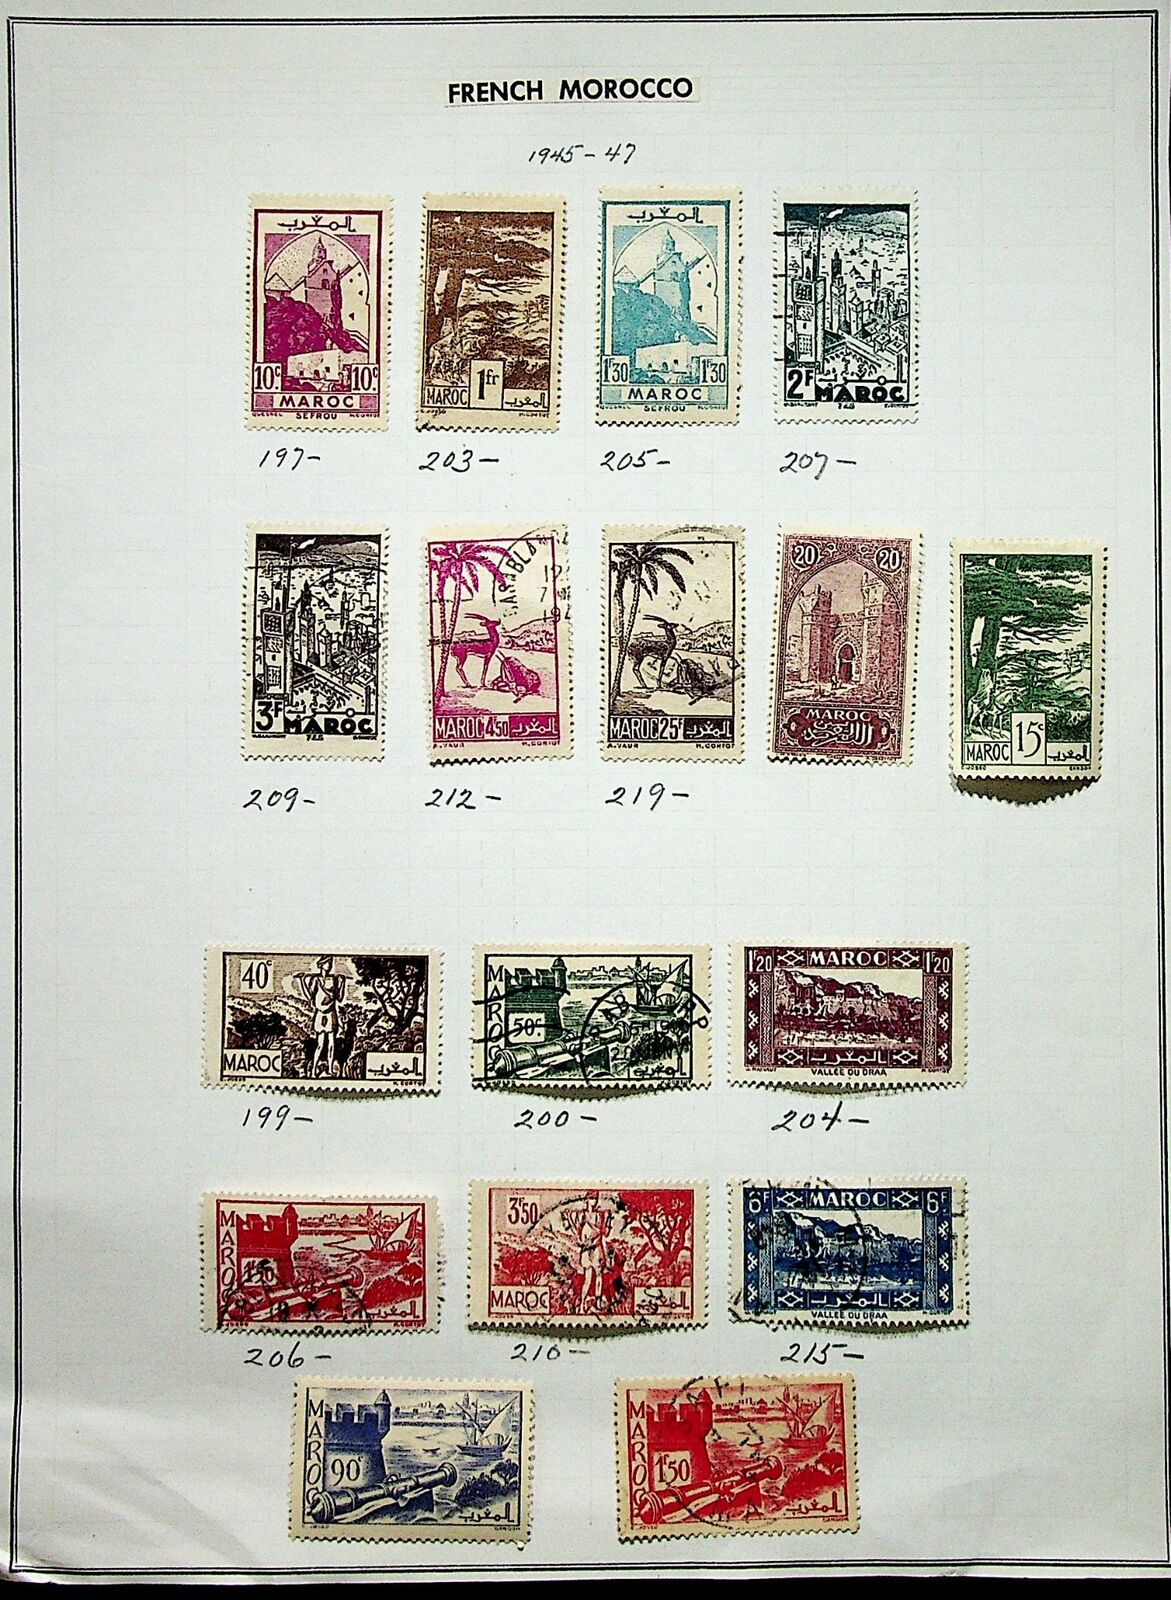 FRENCH MOROCCO 1945-47 ANIMALS ARCHITECTURE SET OF 17 USED + MINT STAMPS